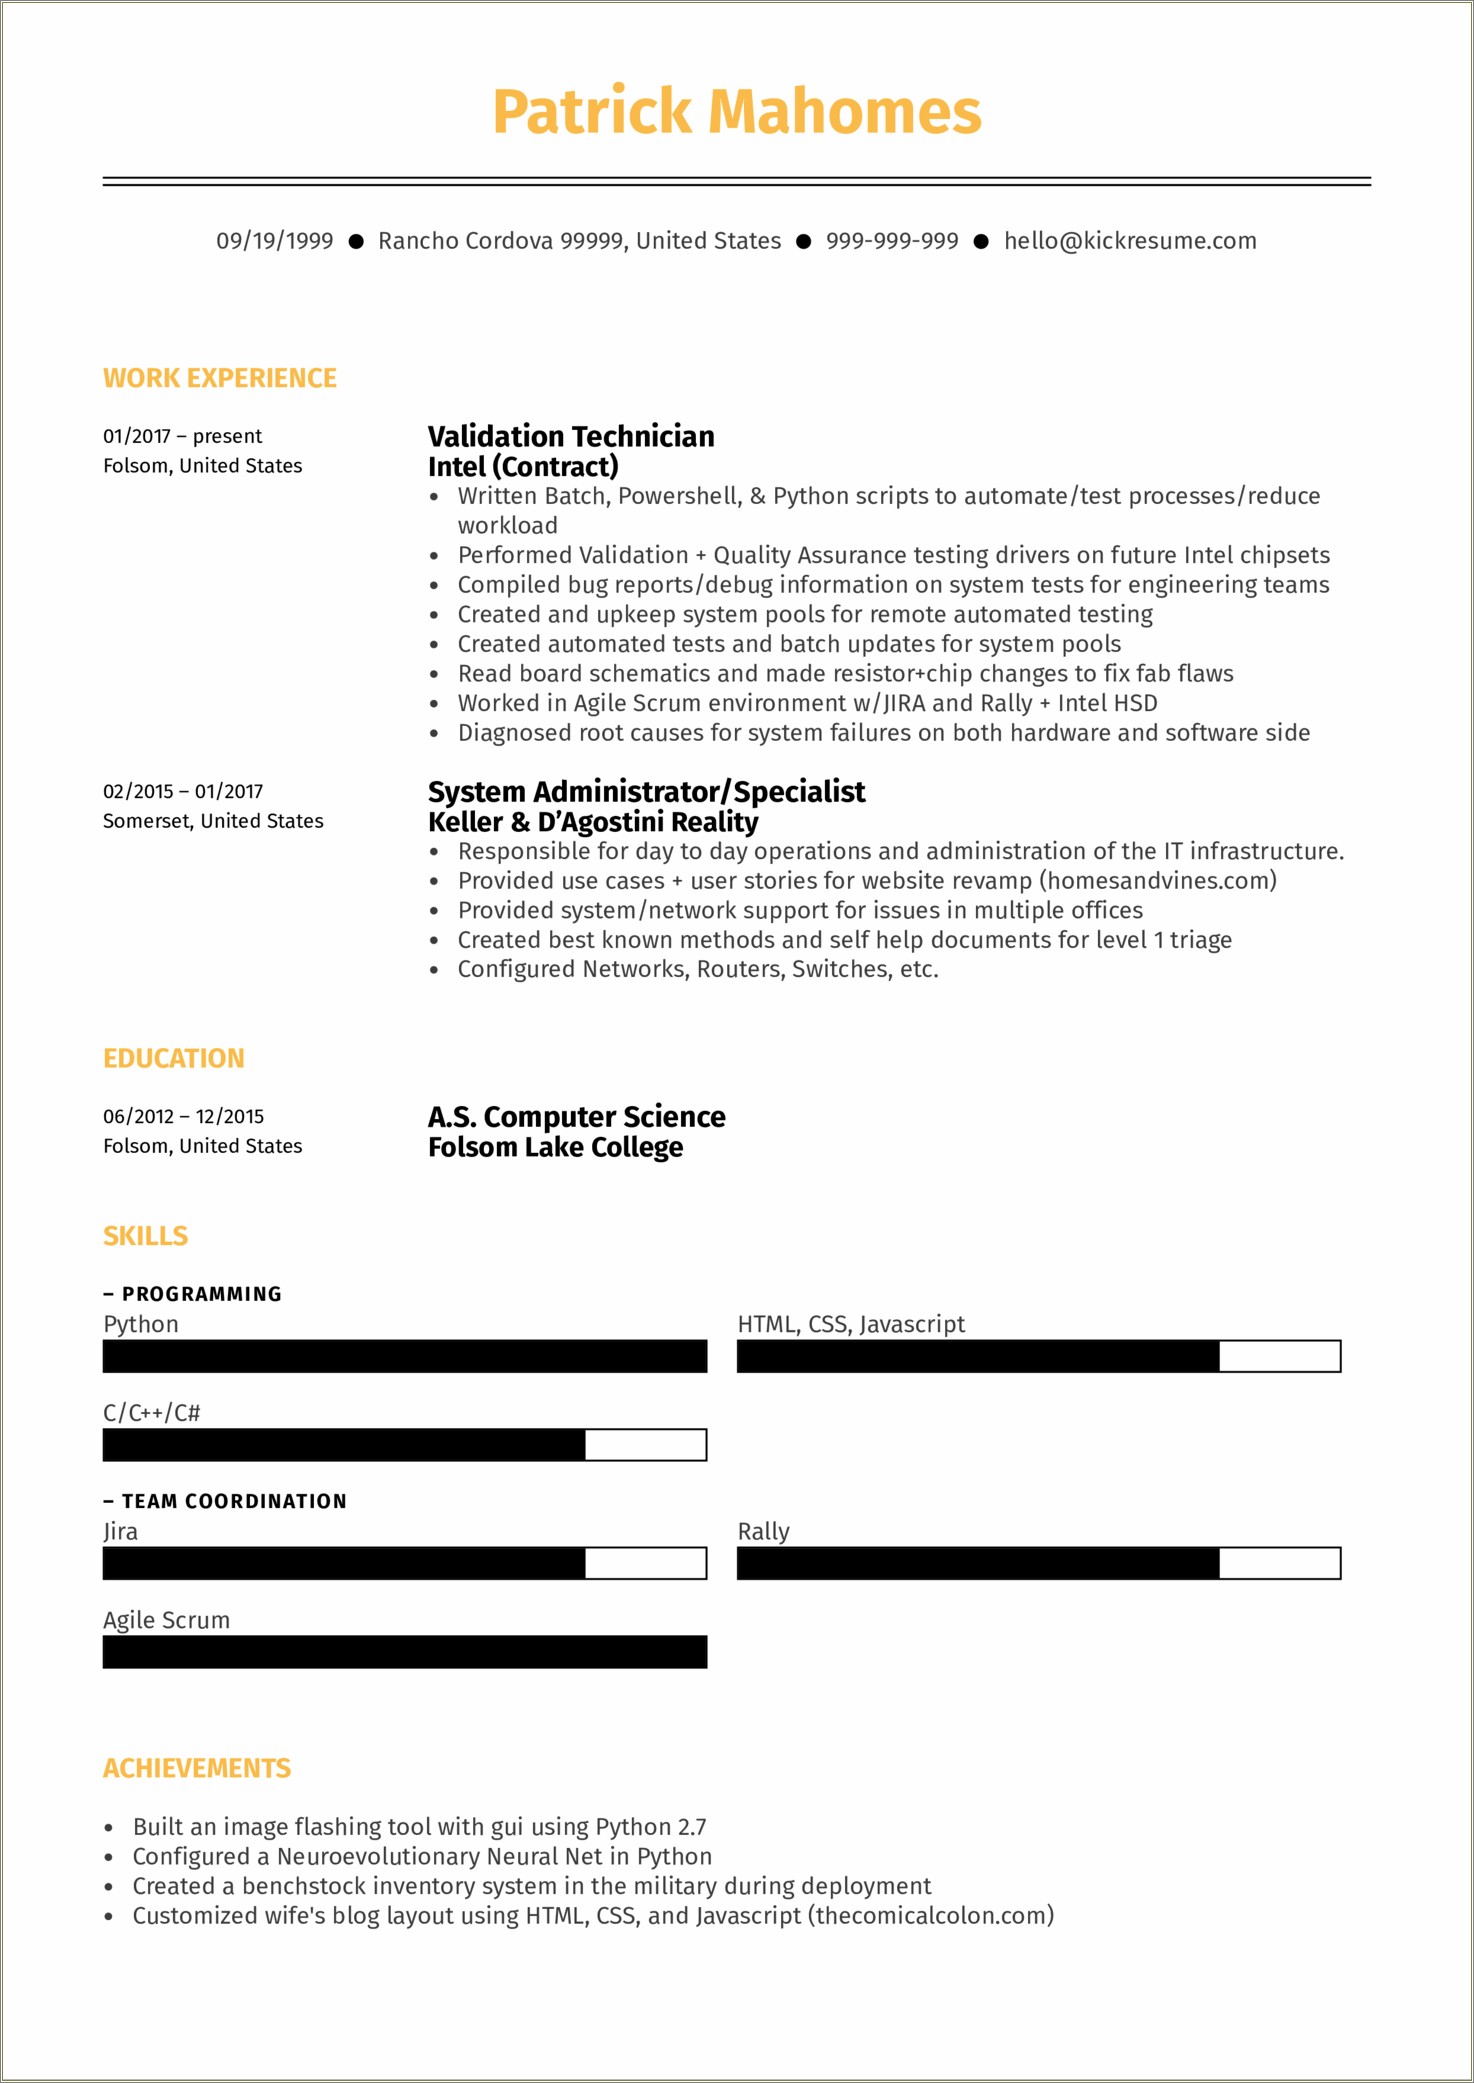 Sample Resume Format For Experienced System Engineer